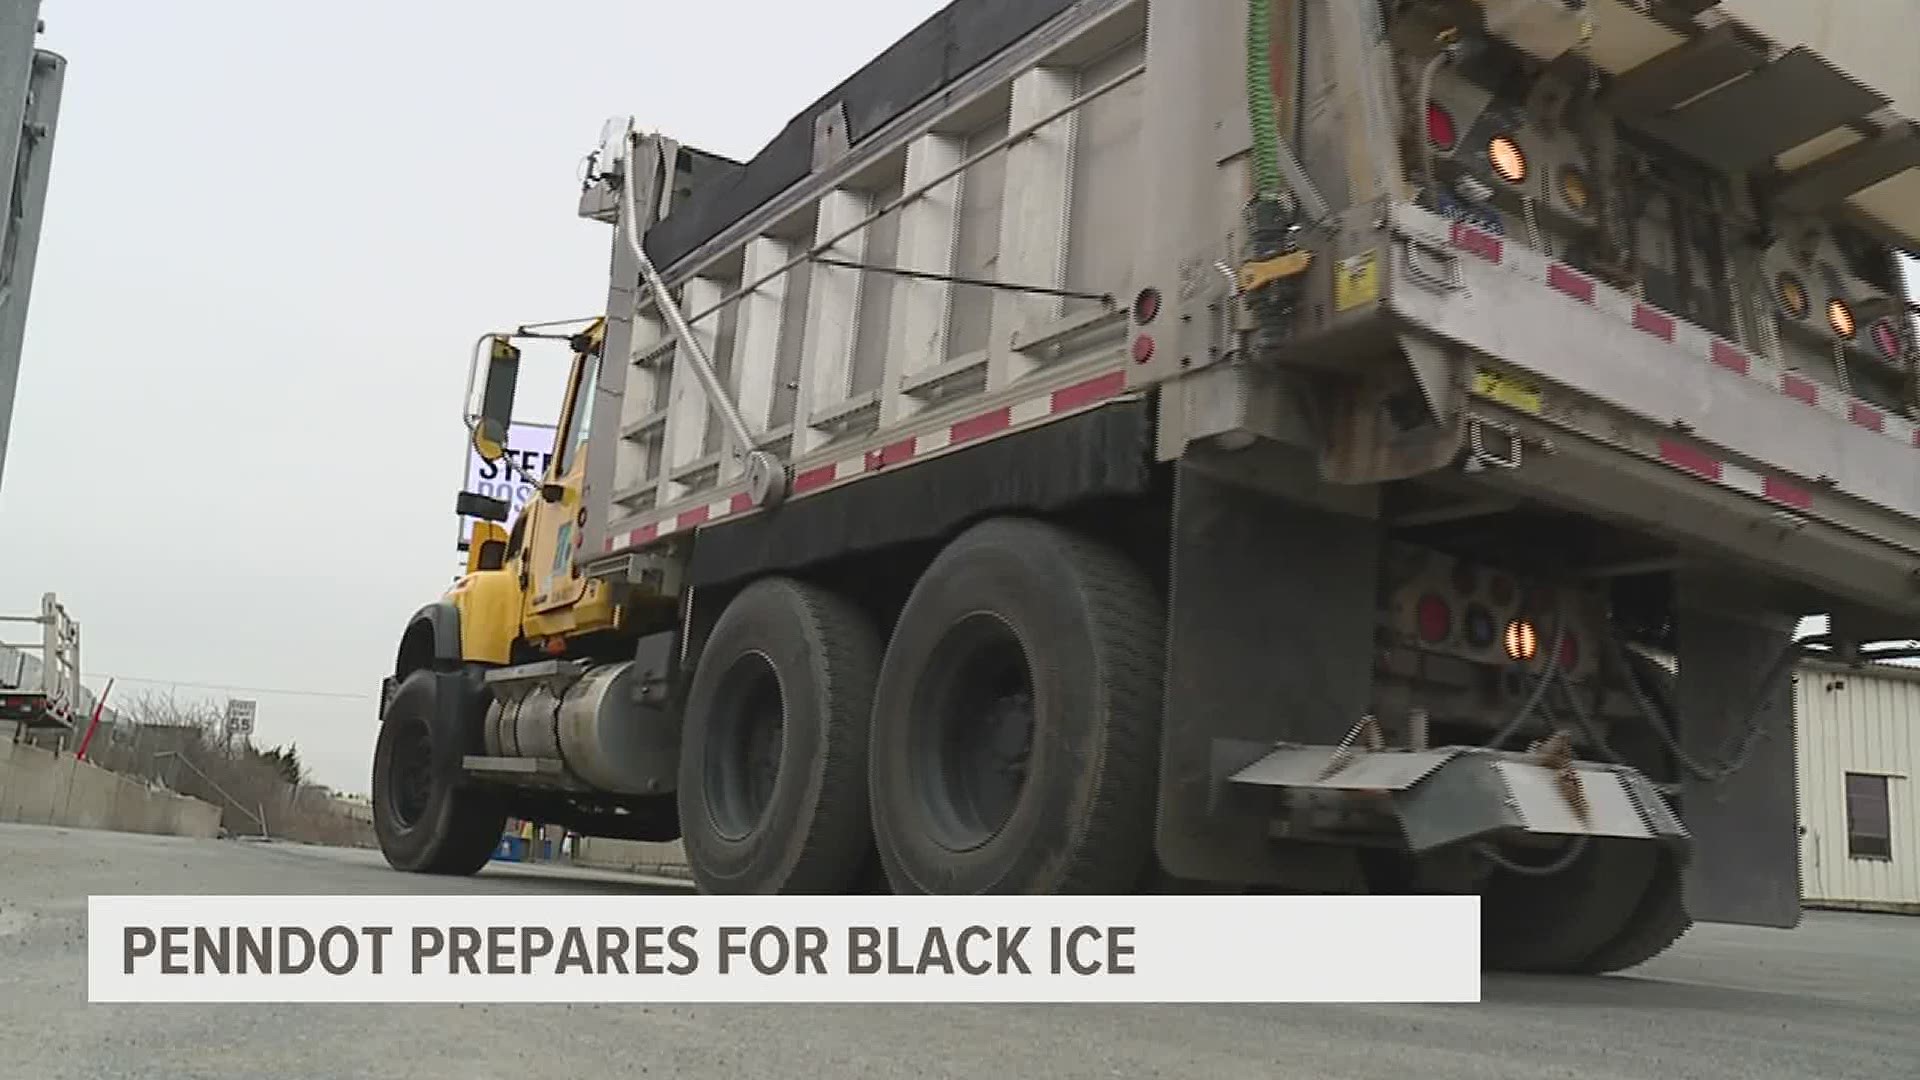 PennDOT said it's focused on Monday night into Tuesday morning as crews got a jumpstart on the storm by pretreating the roadways.